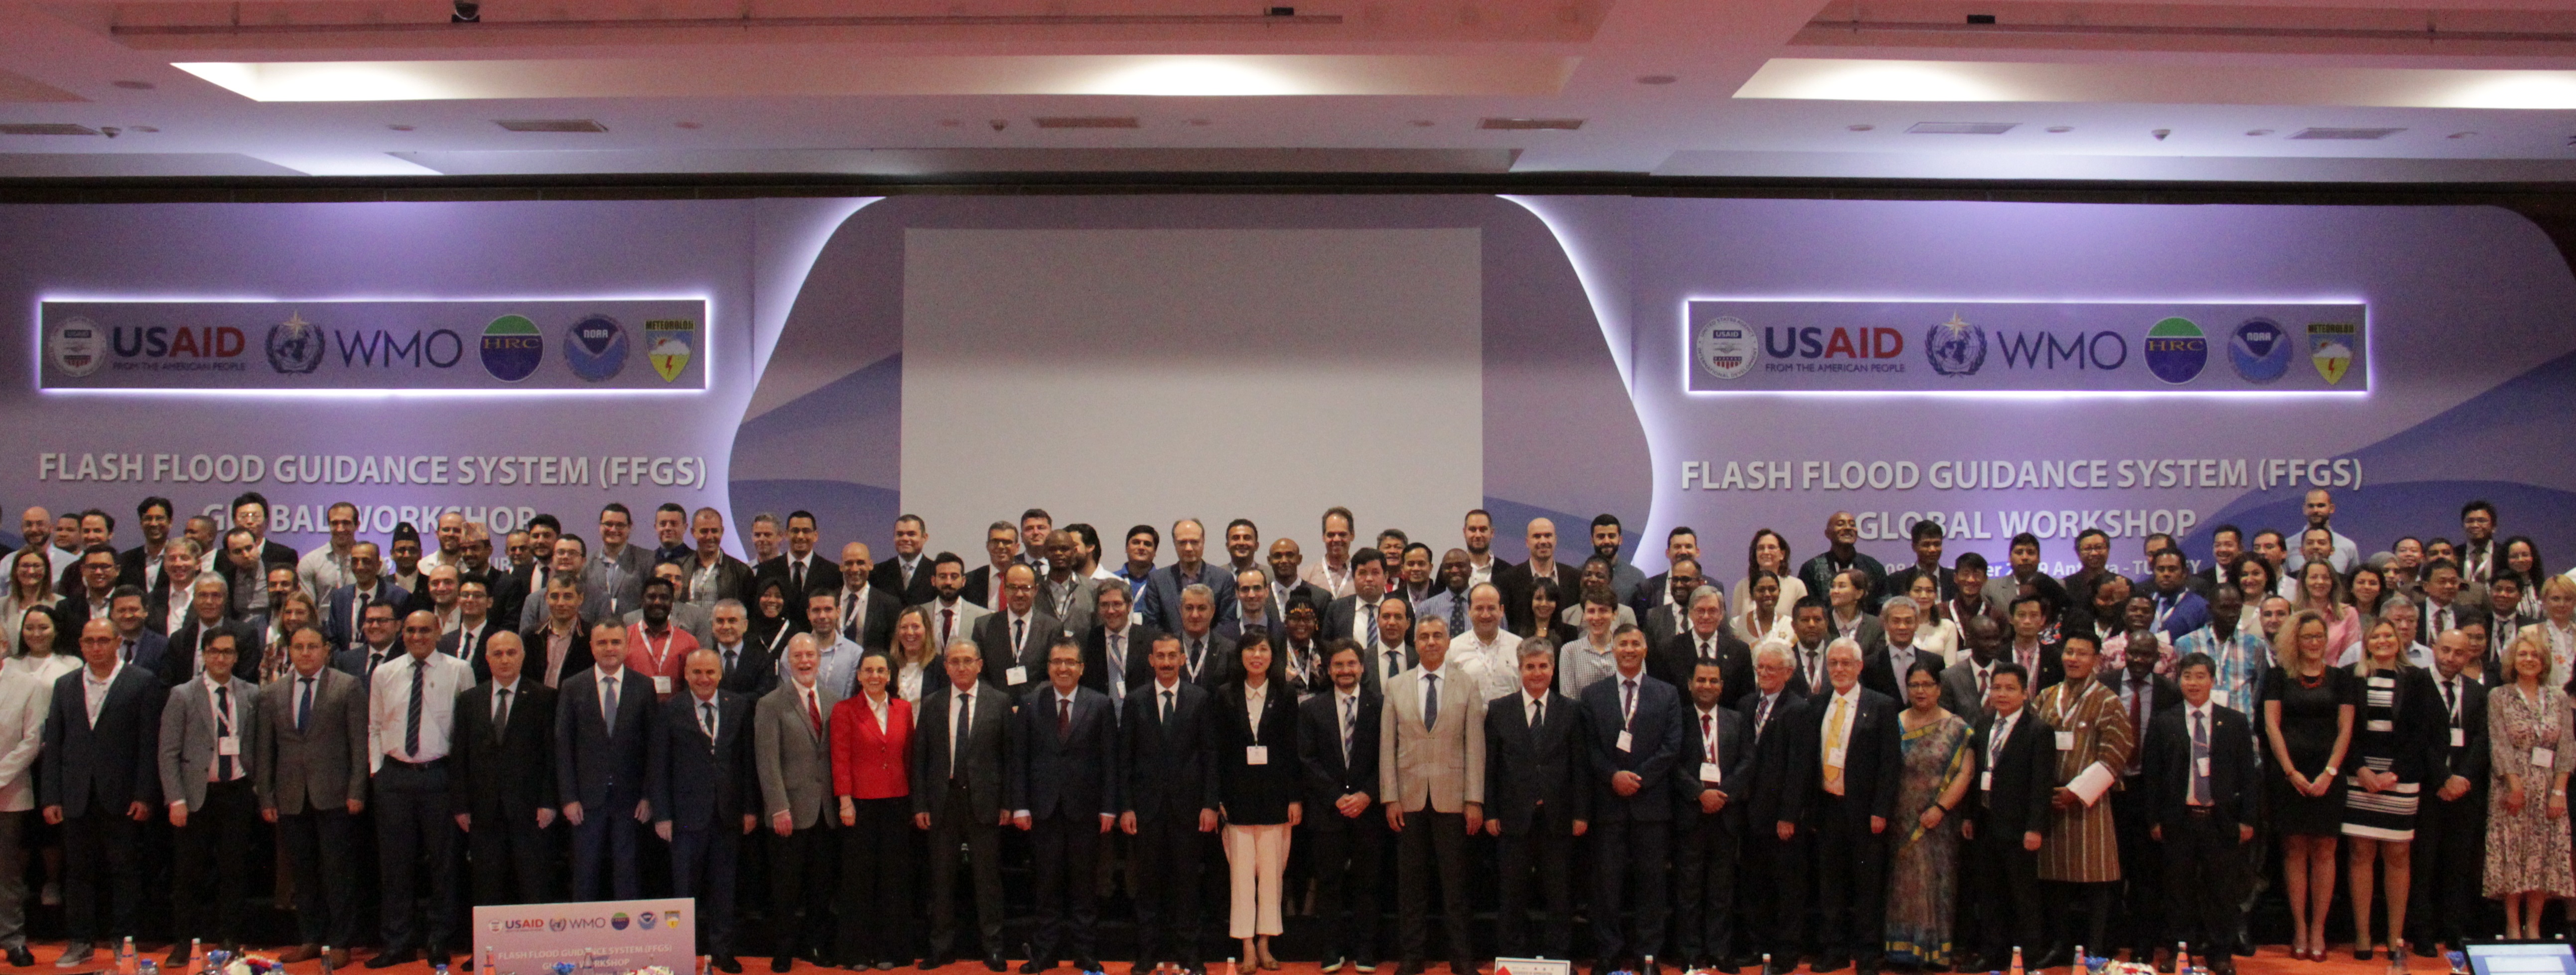 FFGS Global Workshop 2019 Group picture